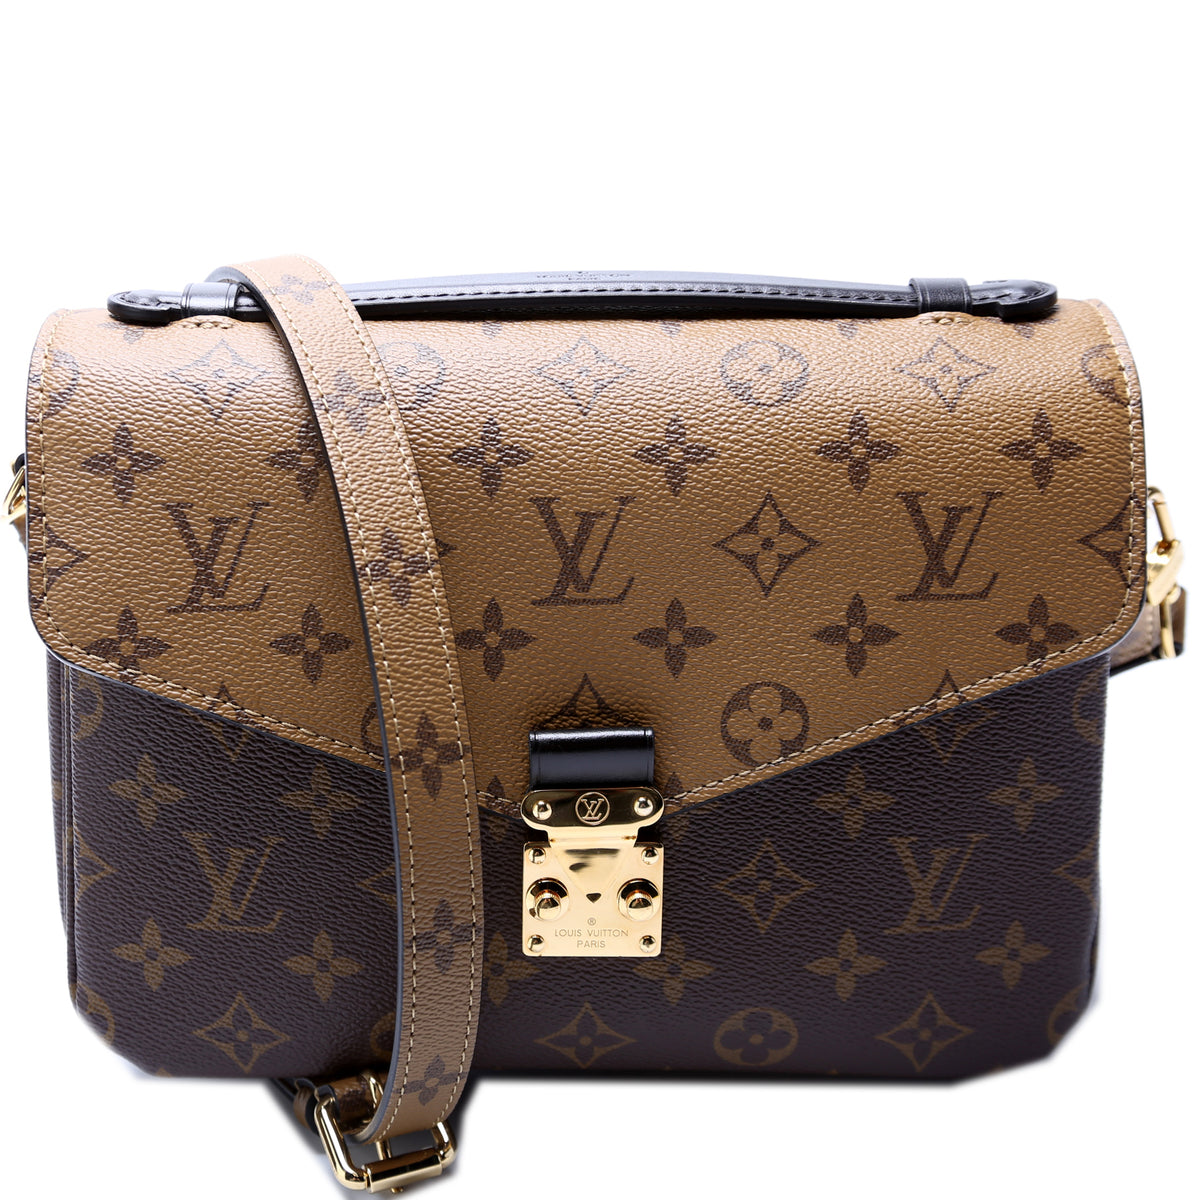 Sold Louis Vuitton Monogram Pochette Metis Reverse 2020 Used In Good  codition.